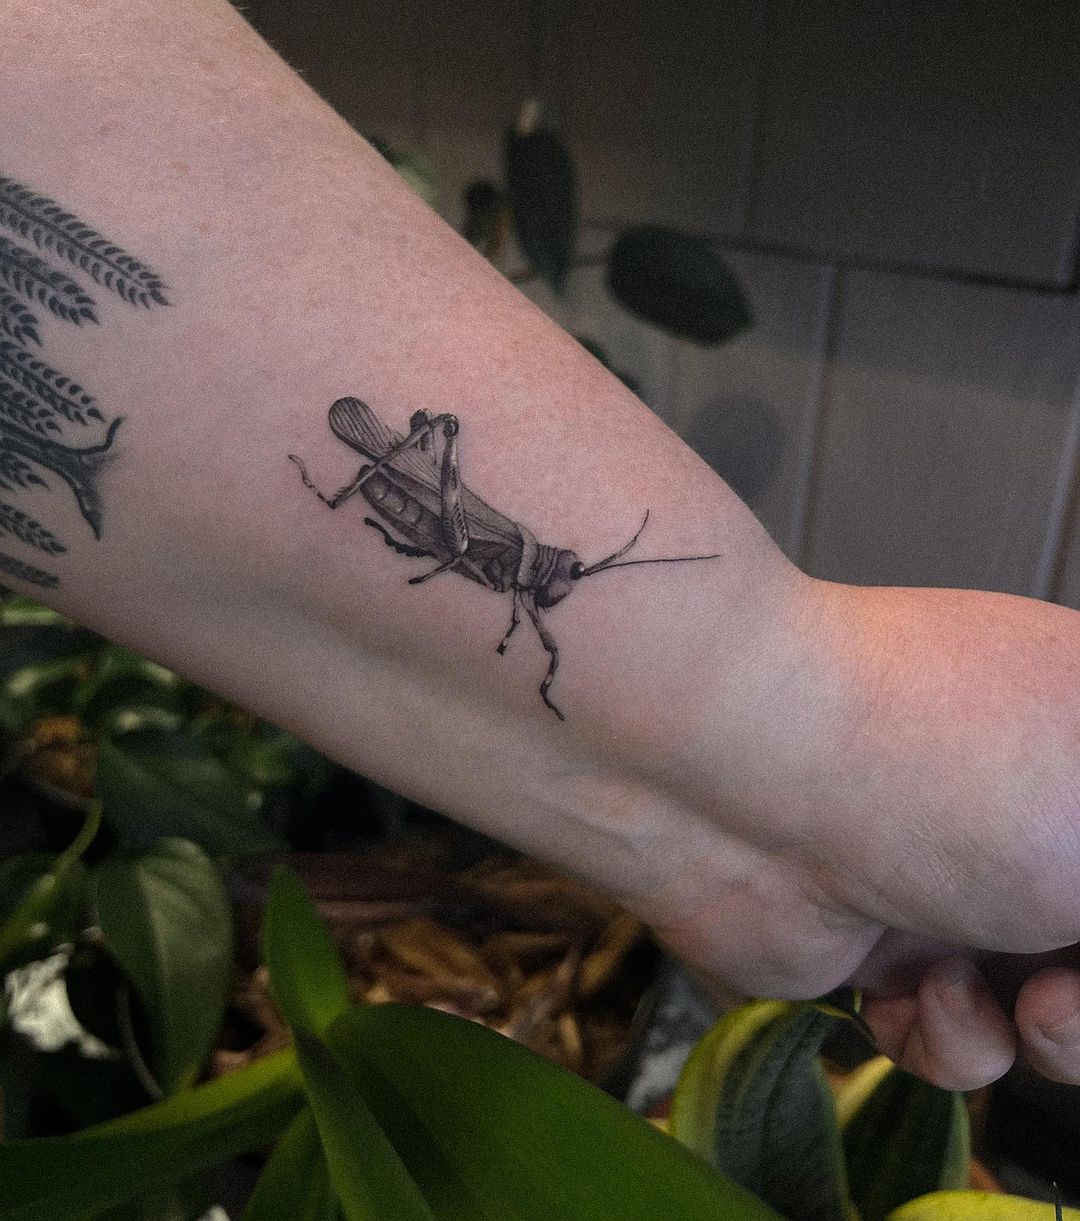 Grasshopper tattoo by noratadroes